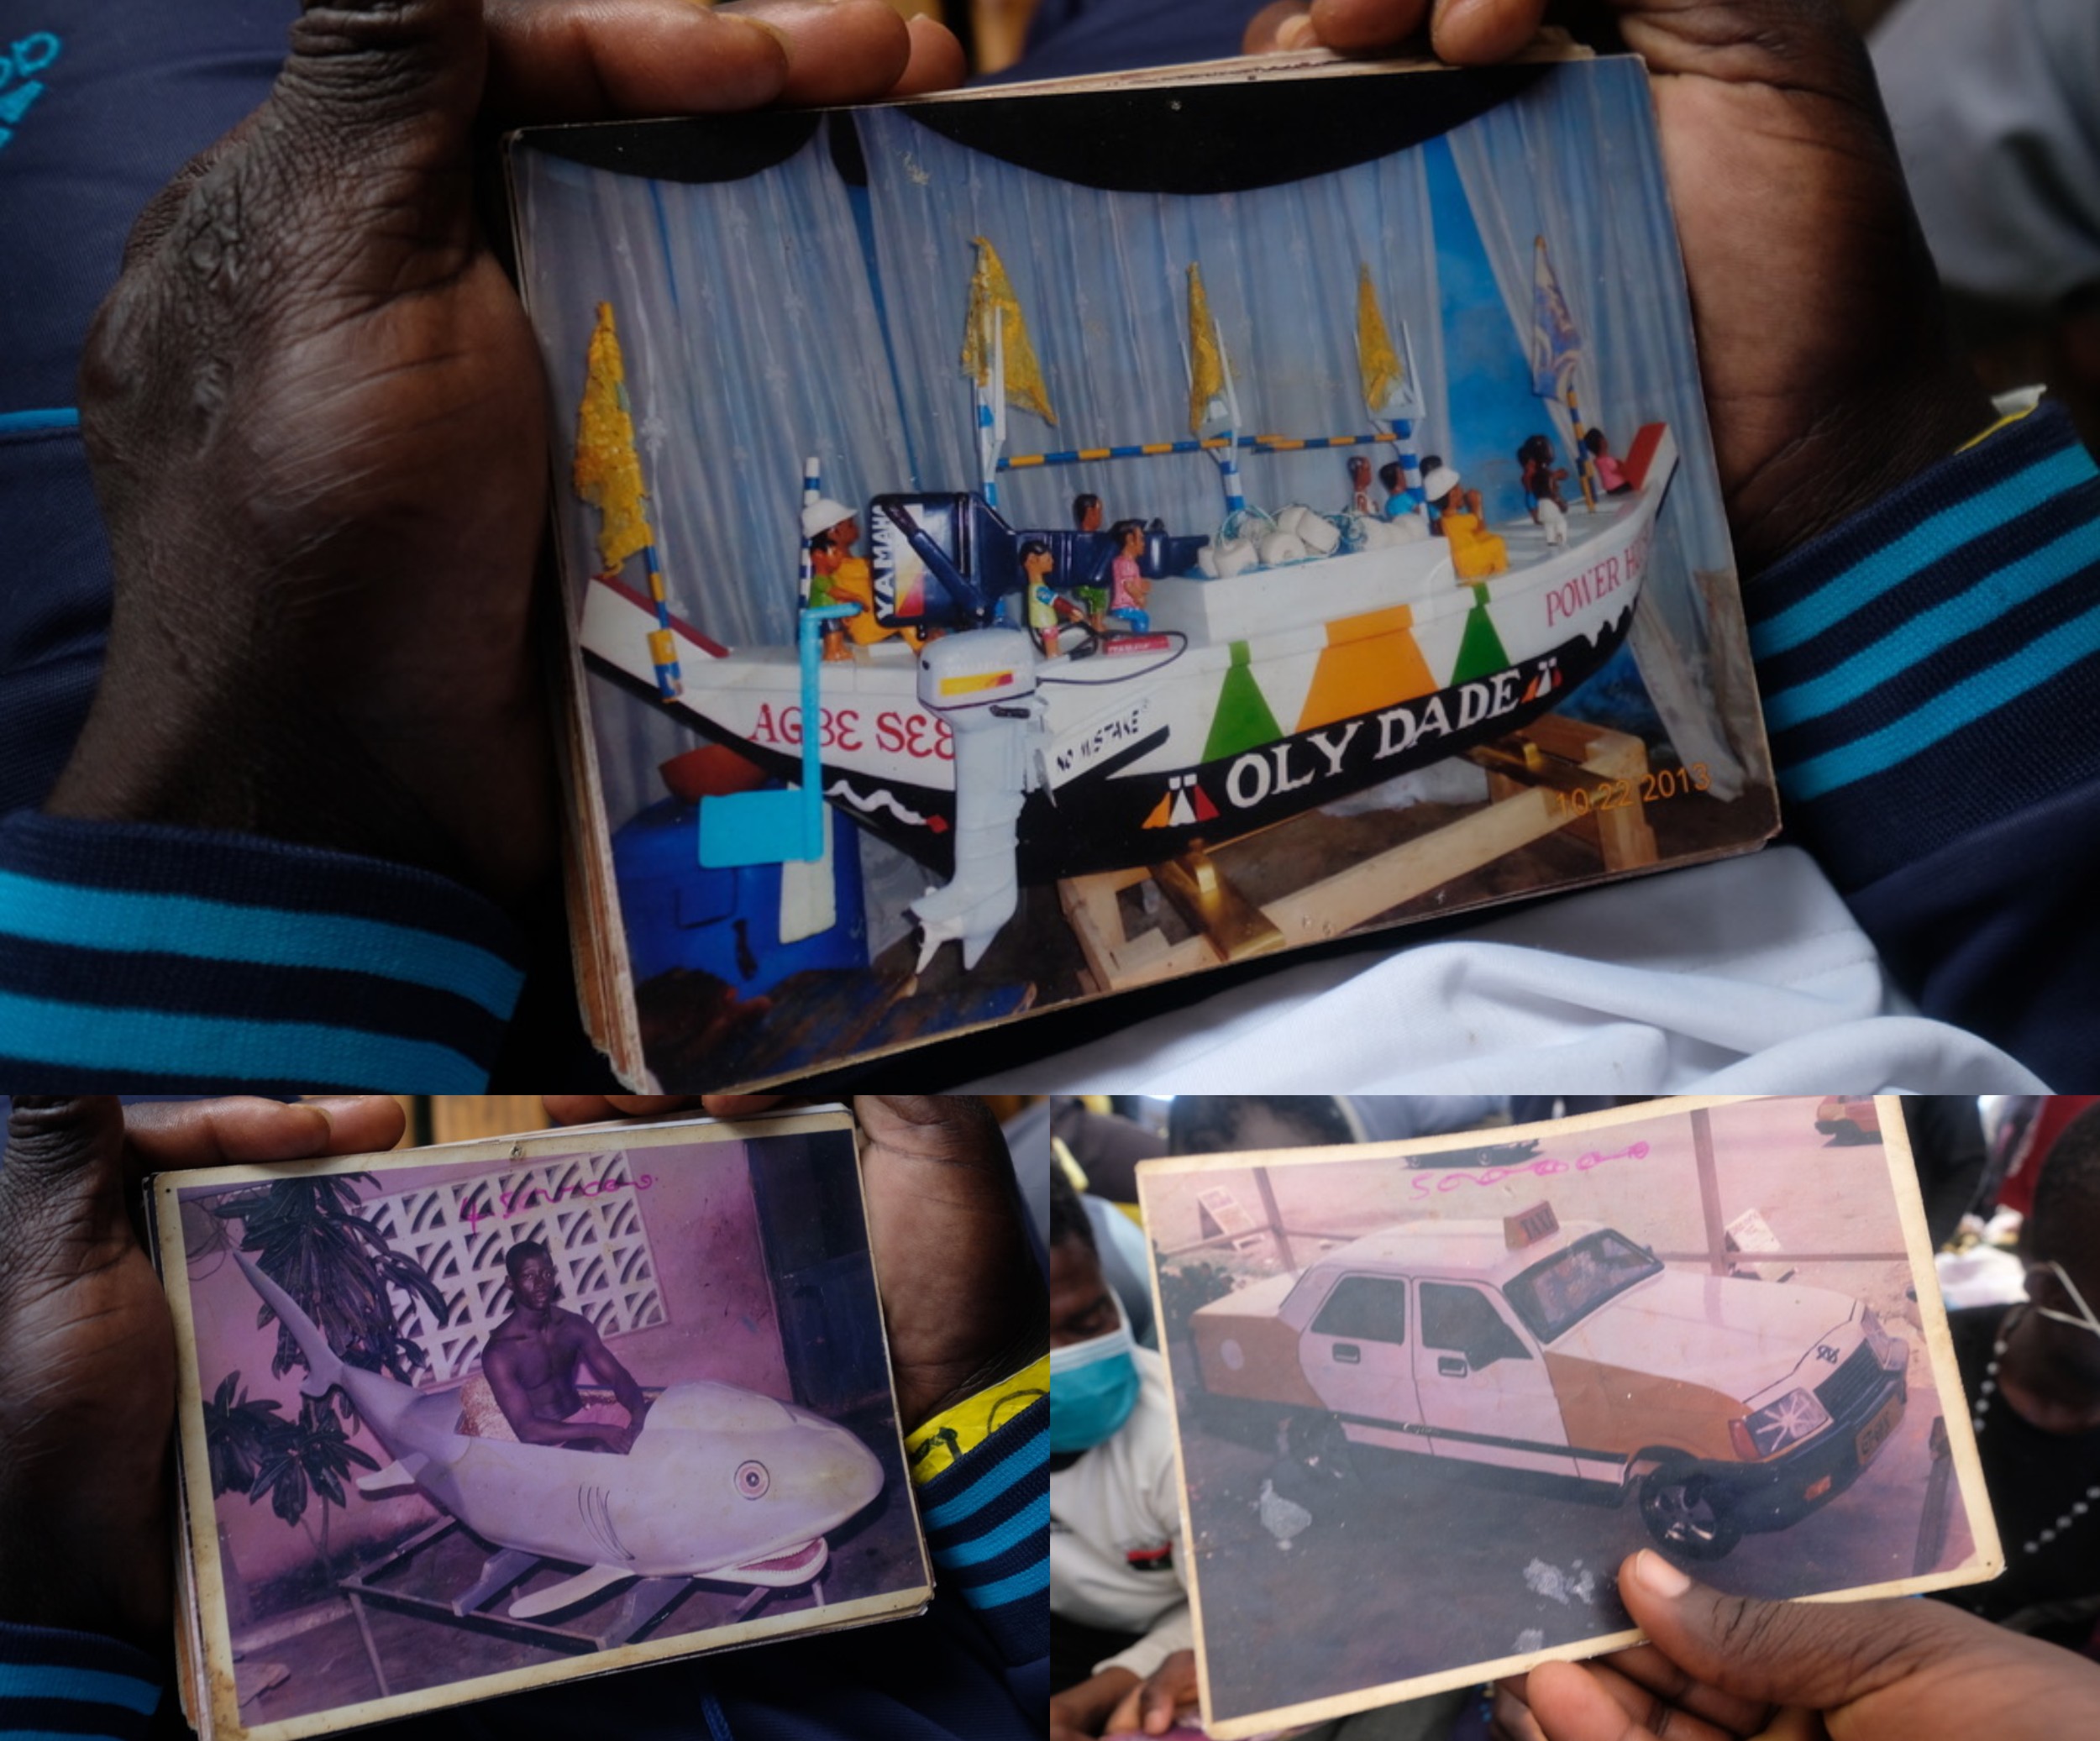 Stephen Donkoh proudly showed photographs of his work - including coffins shaped like fishing boats, sharks or taxi cabs (MEE/Karlos Zurutuza)